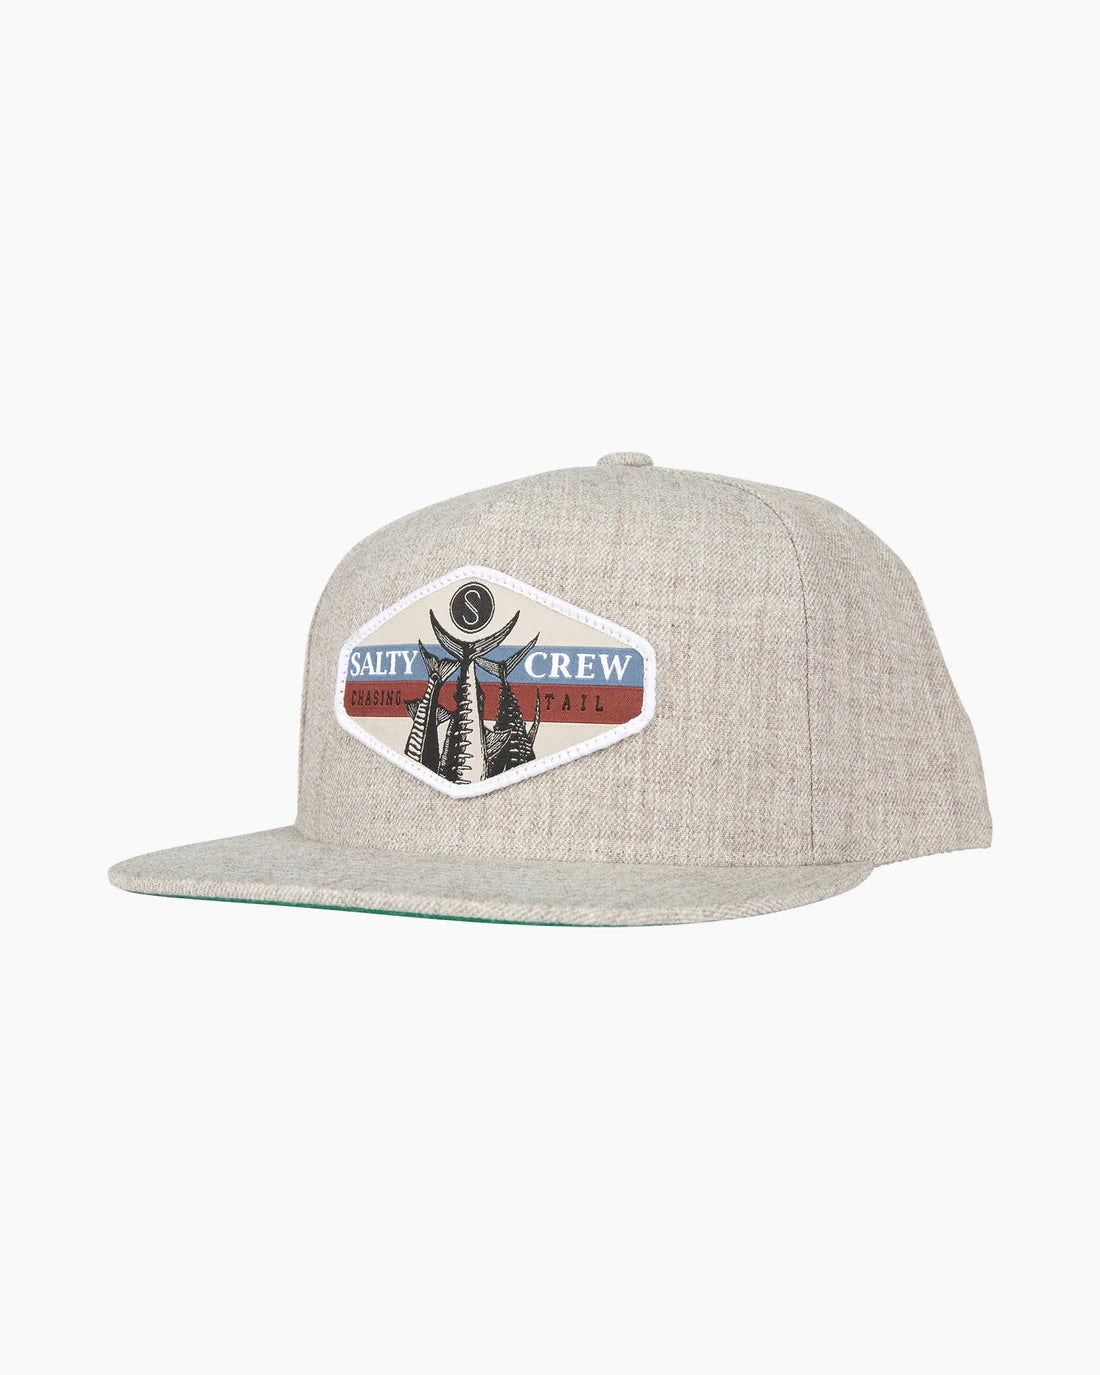 Salty Crew - High Tail 5 Panel Hat